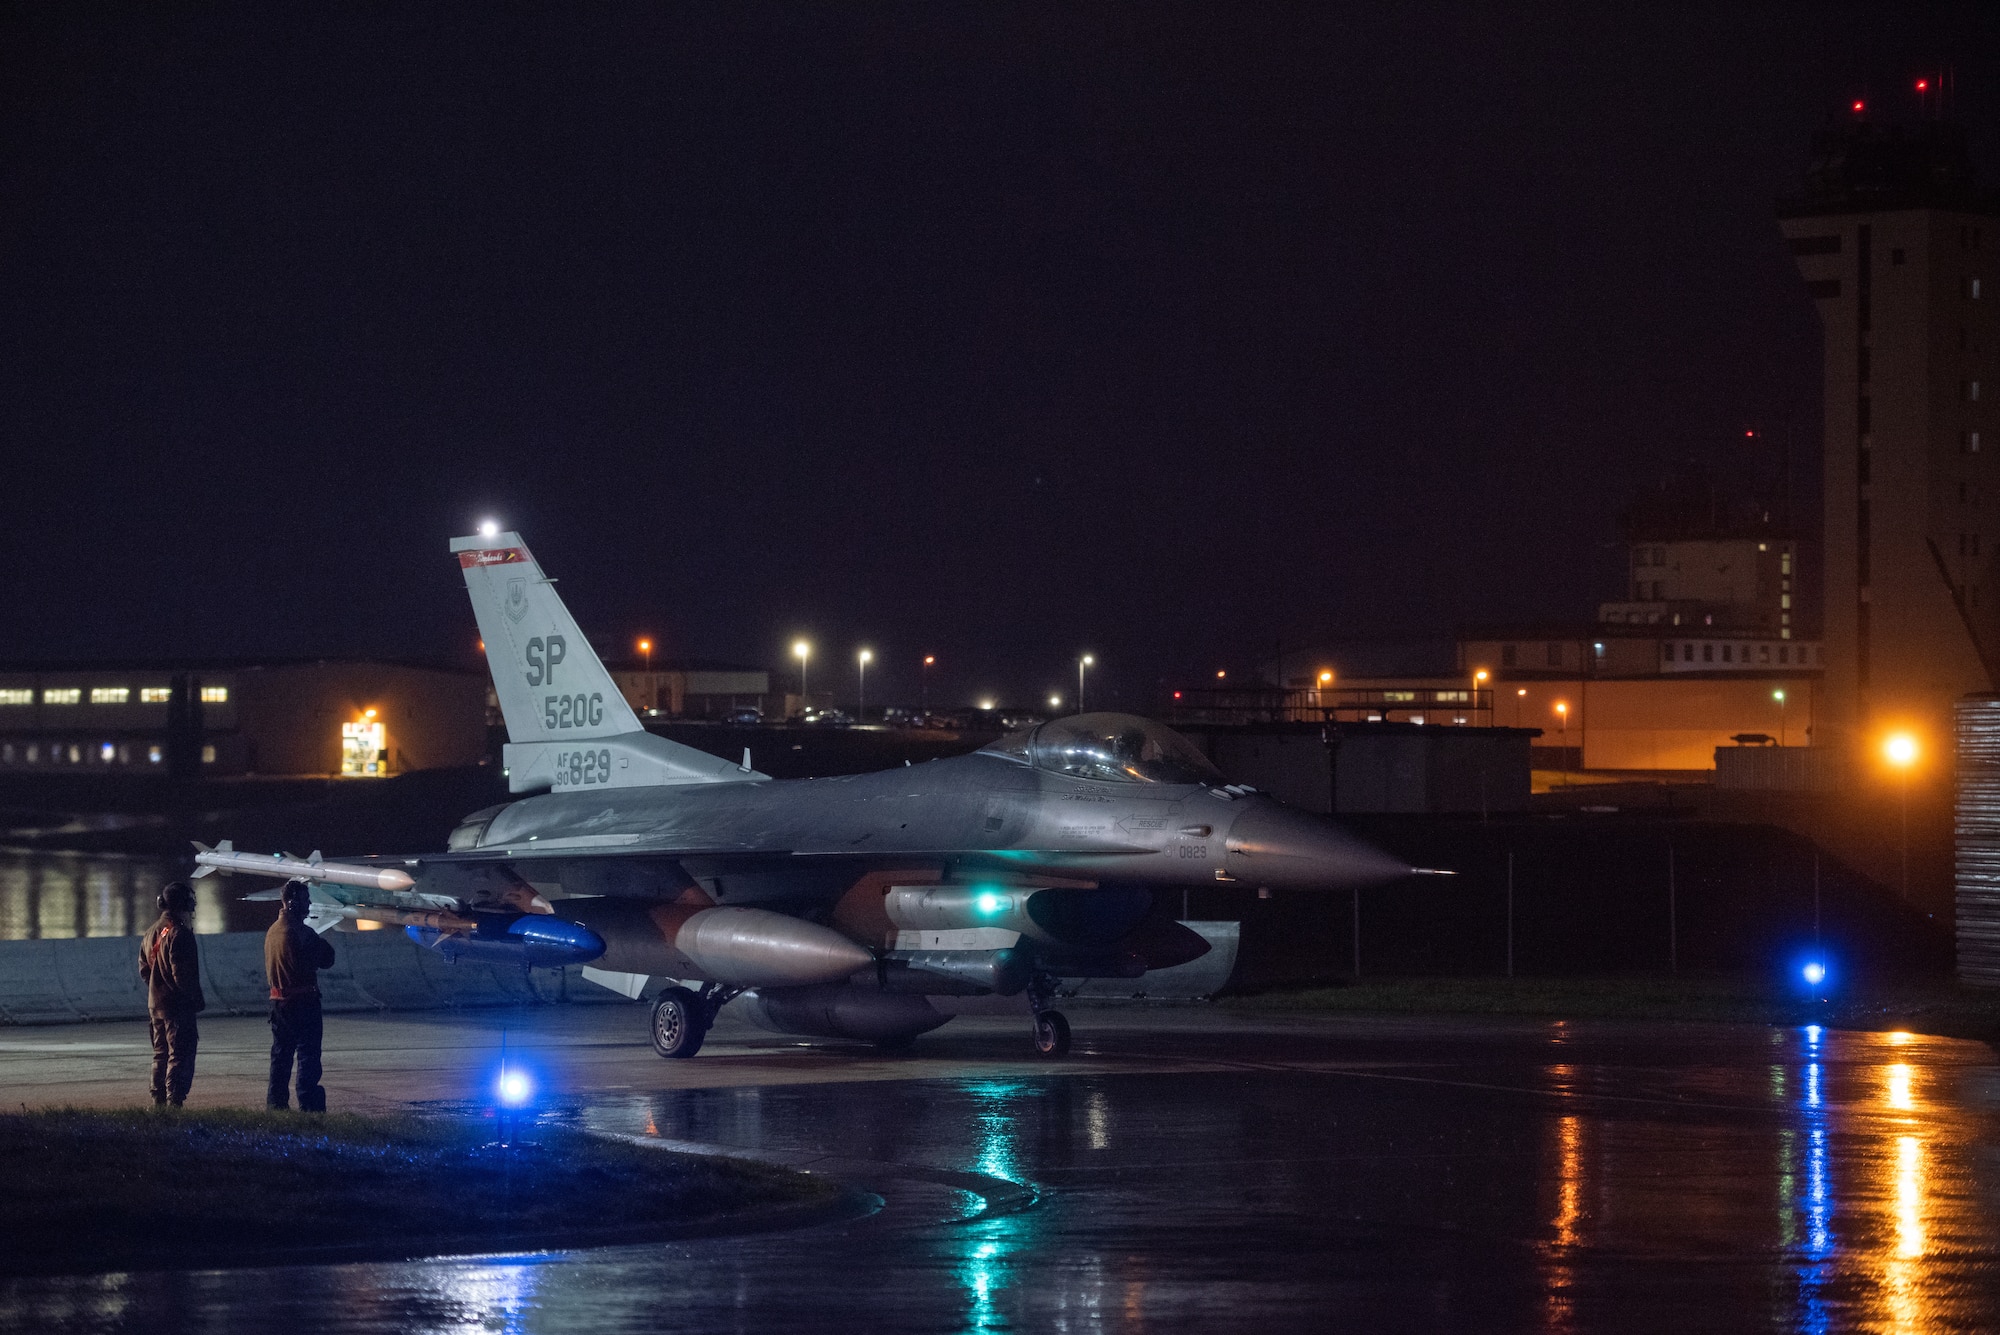 Lights reflect off of the wet flightline as an F-16 taxis across the flightline at night.